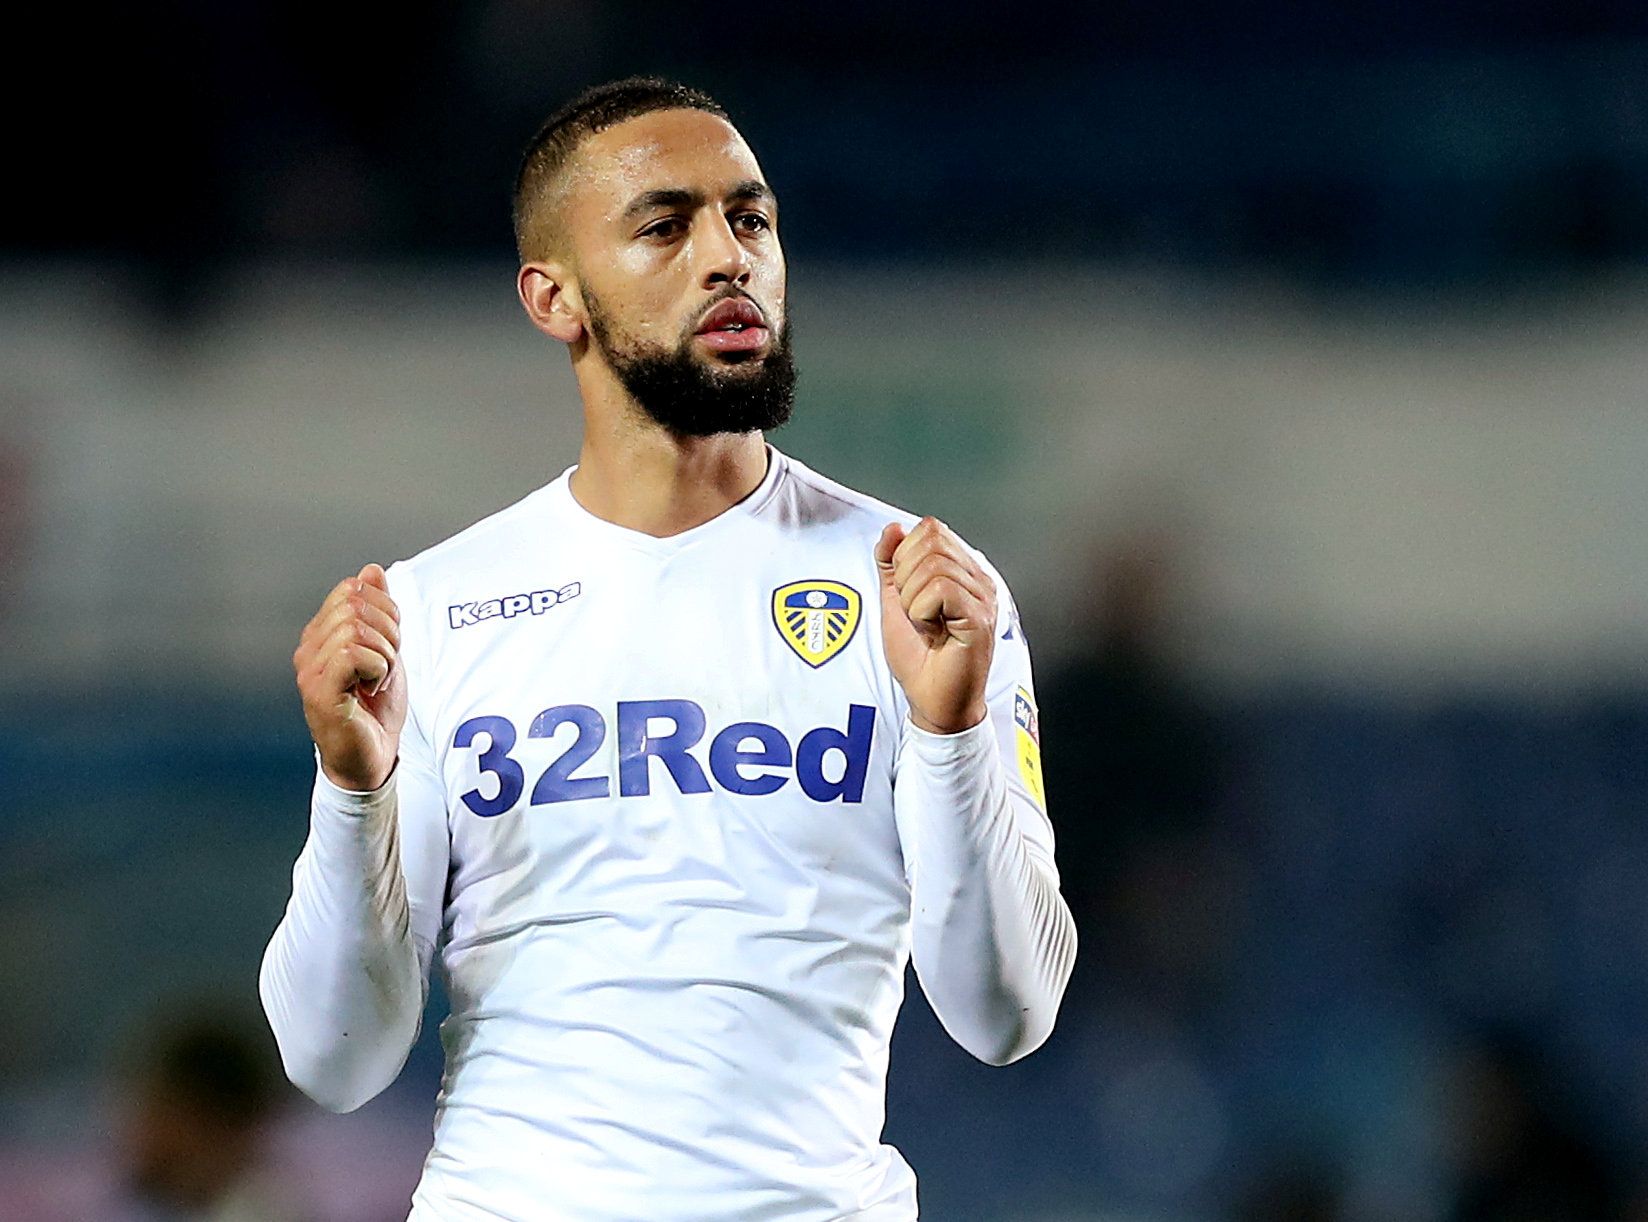 Soccer Football - Championship - Leeds United v Reading - Elland Road, Leeds, Britain - November 27, 2018   Leeds United's Kemar Roofe celebrates after the match    Action Images/John Clifton    EDITORIAL USE ONLY. No use with unauthorized audio, video, data, fixture lists, club/league logos or 